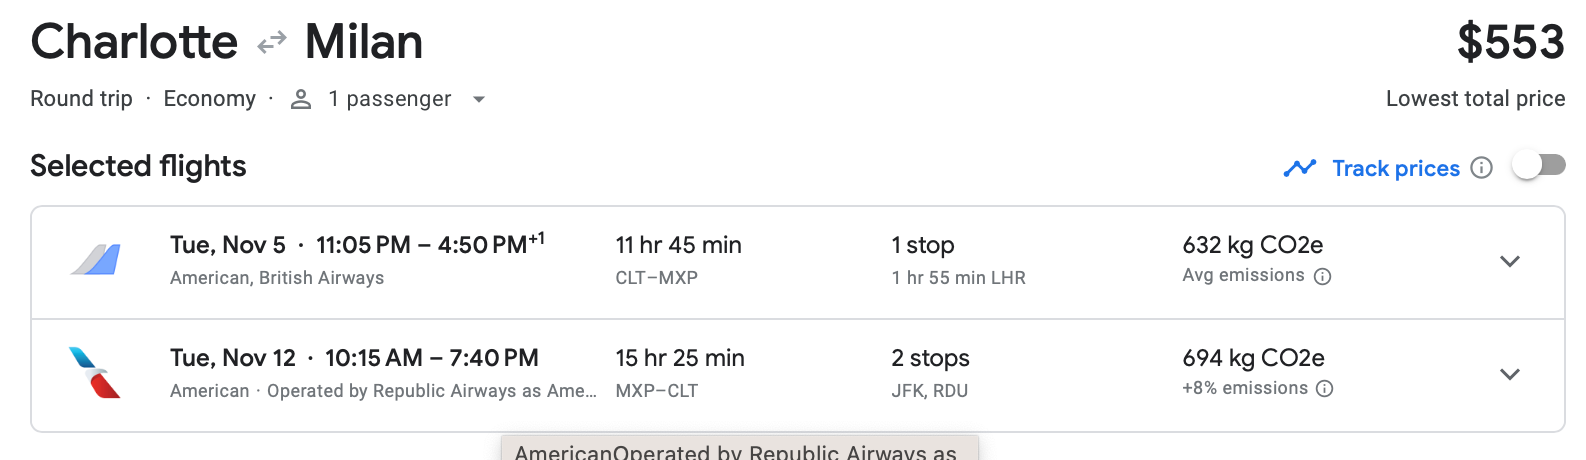 A screenshot of a Google Flights deal for a round-trip flight from Charlotte to Milan.